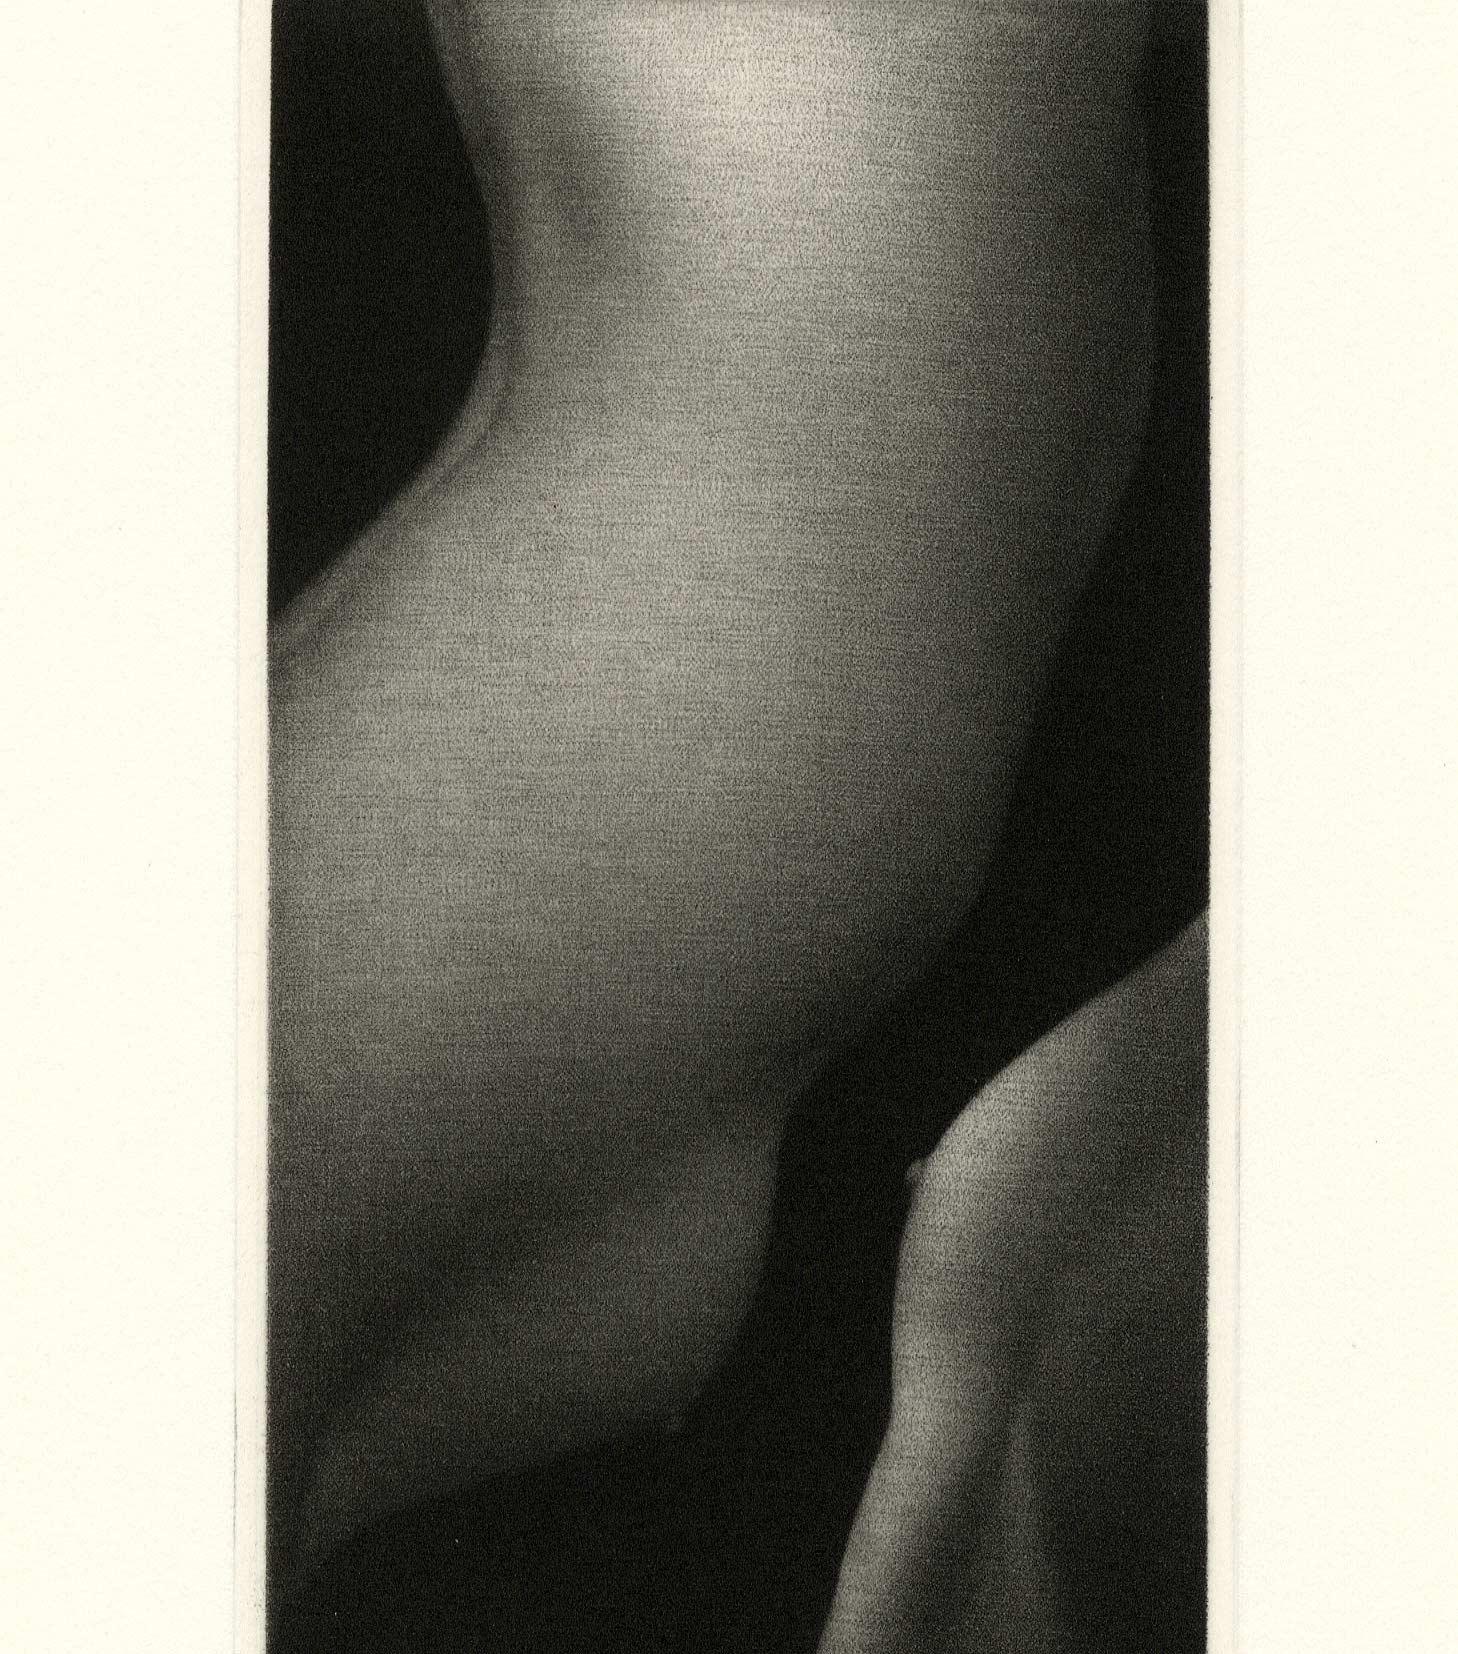 Partition - Print by Mikio Watanabe